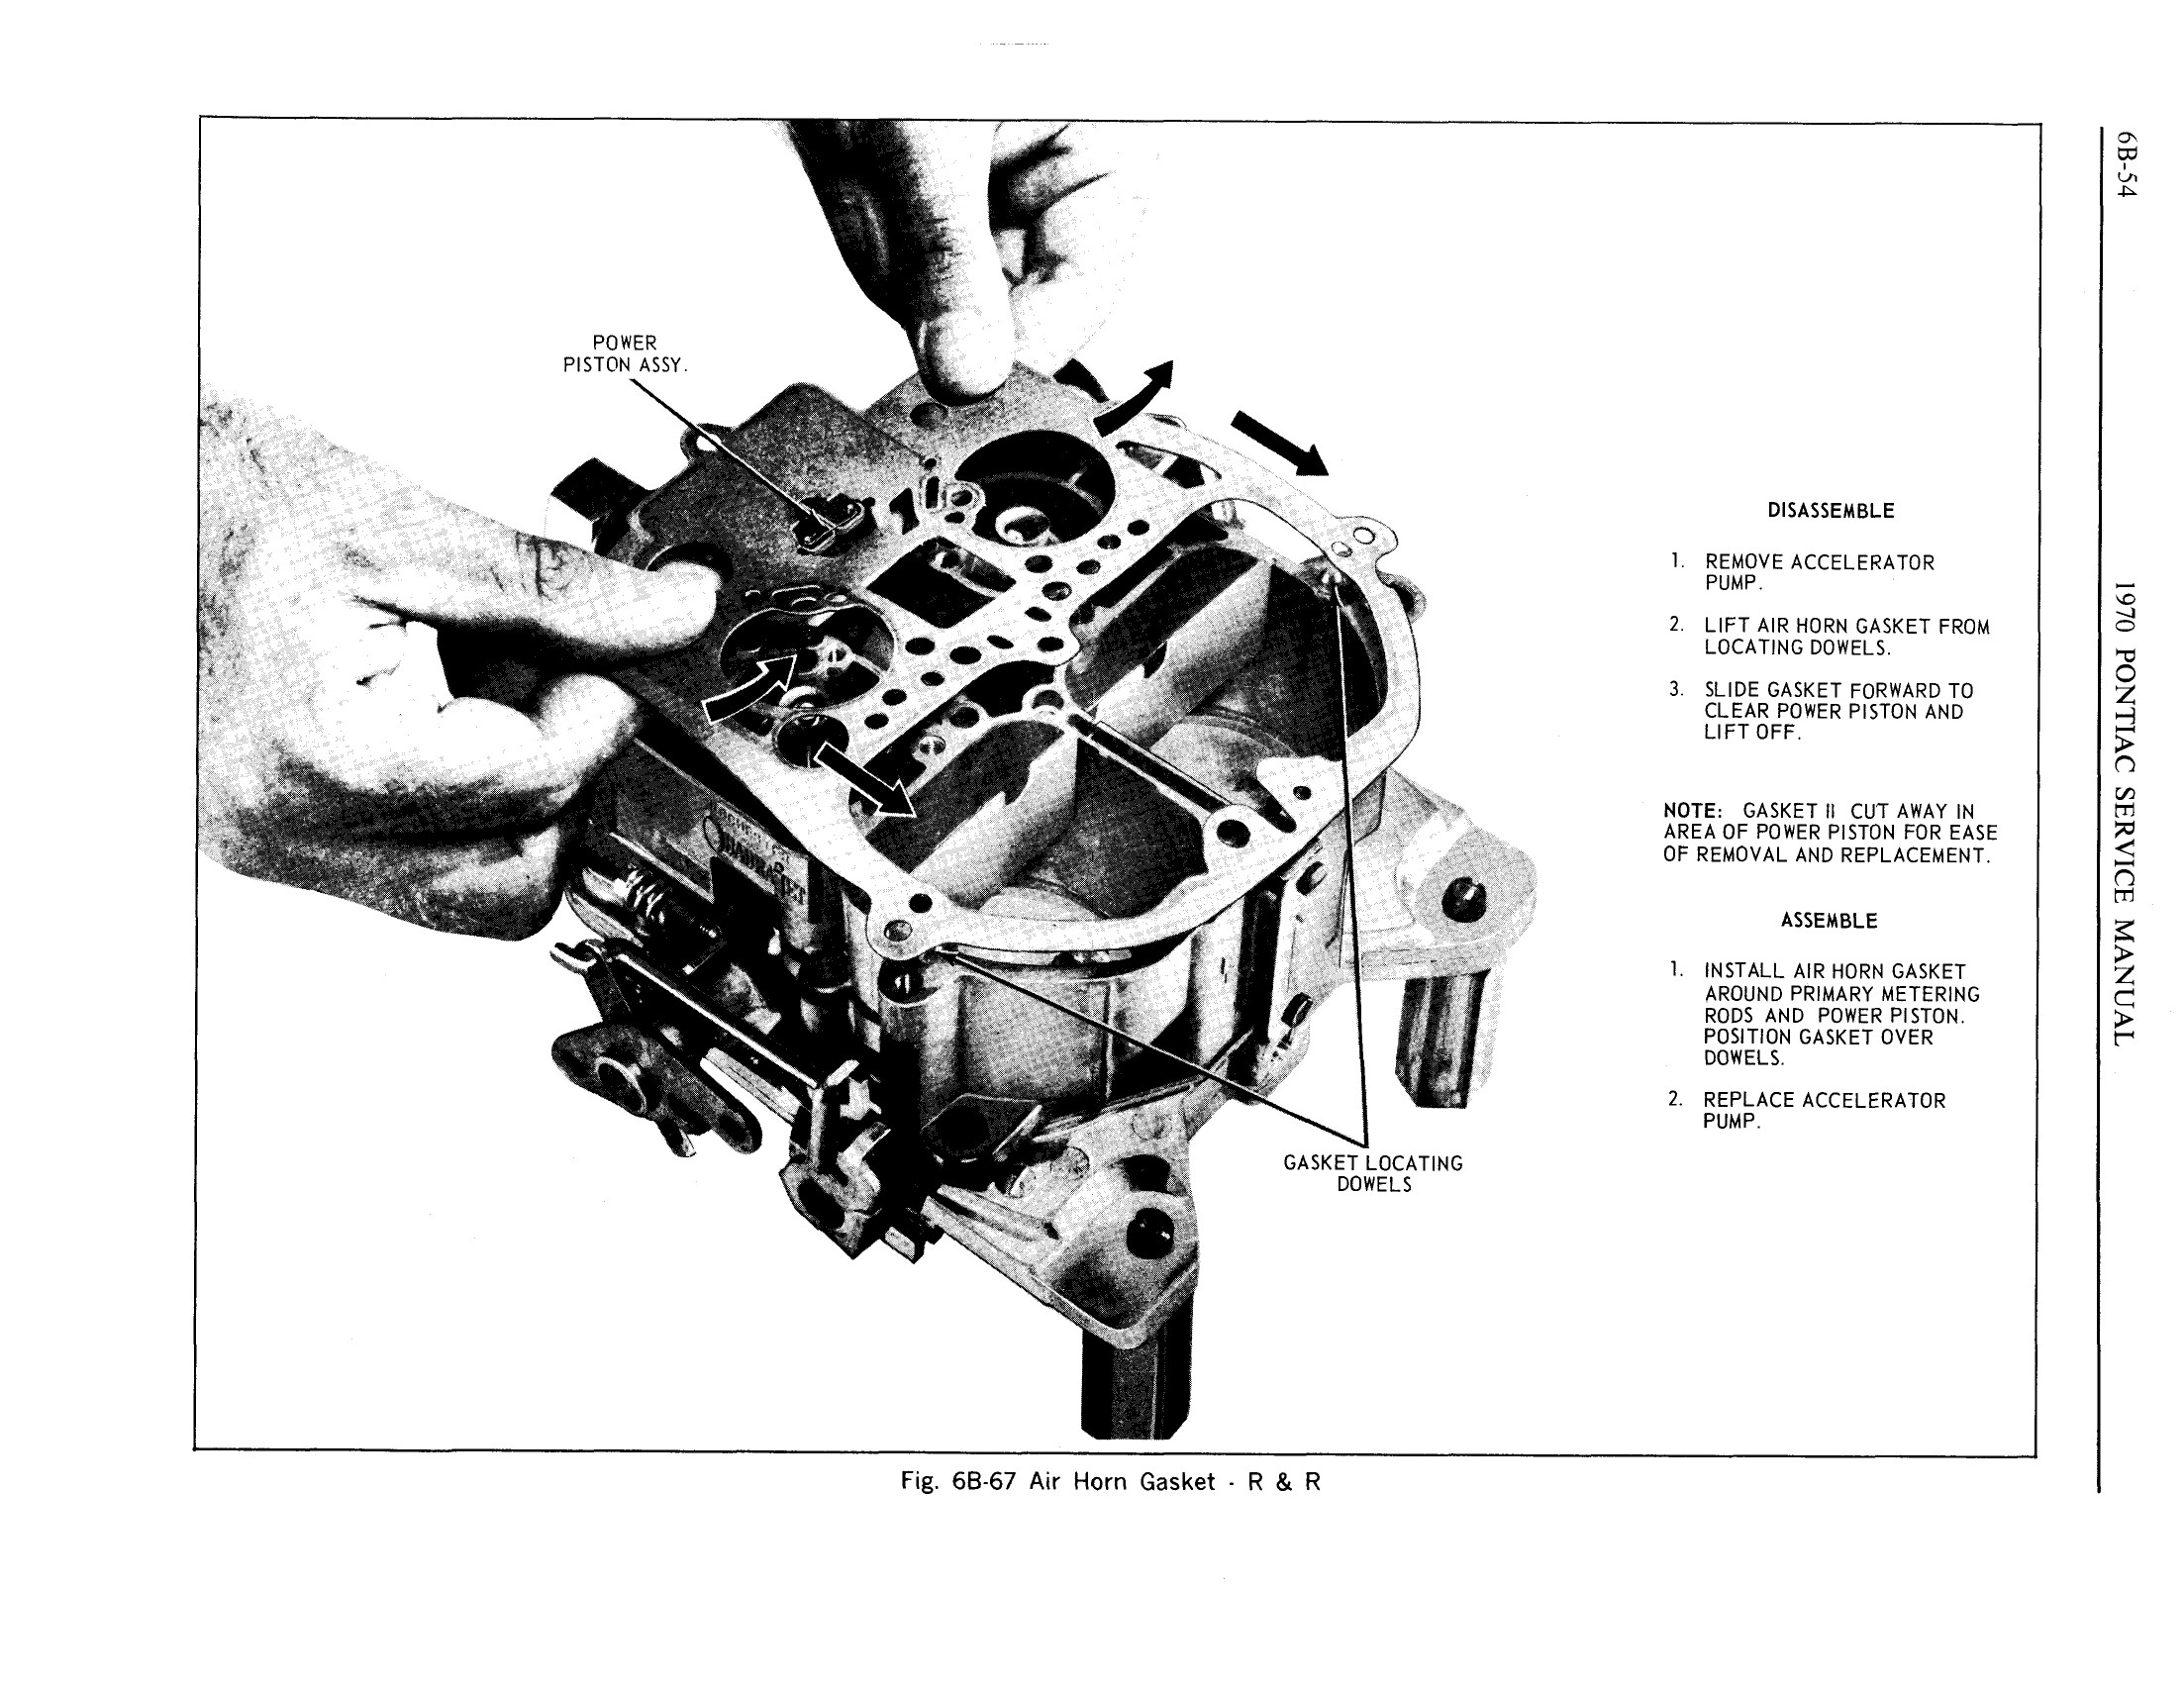 1970 Pontiac Chassis Service Manual - Engine Fuel Page 54 of 65